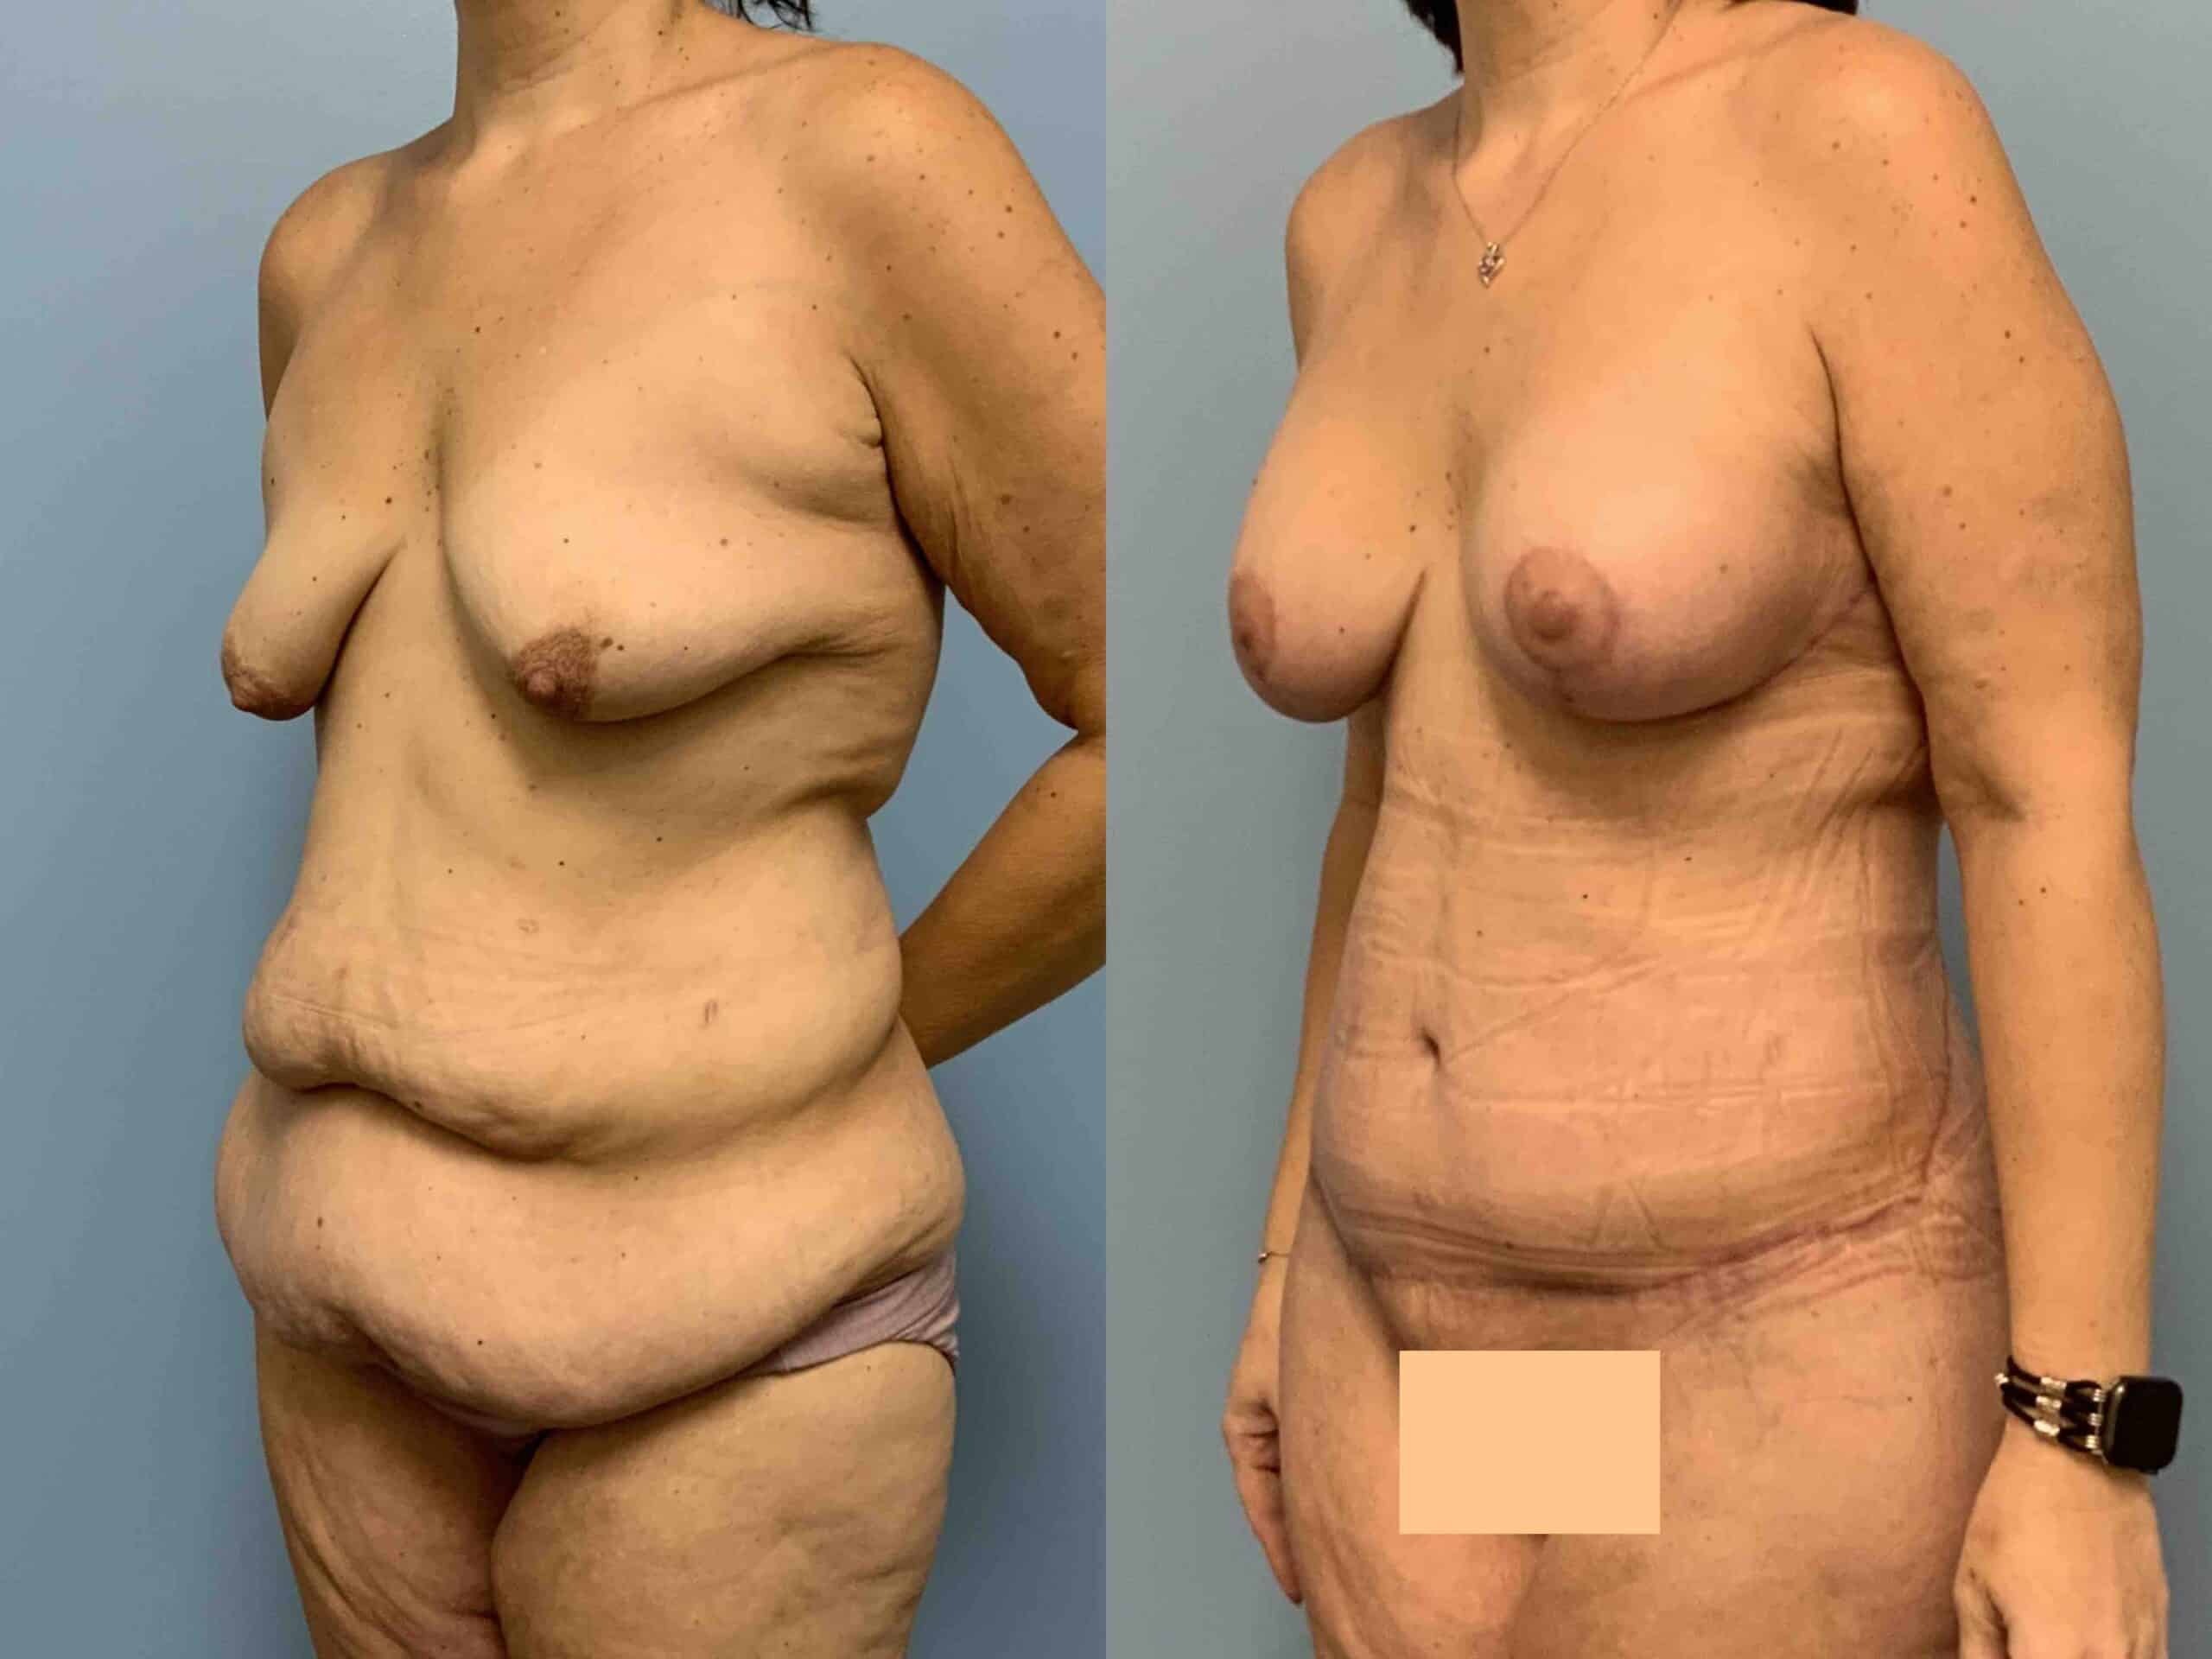 Before and after, 2 mo post op from Tummy Tuck, Belt Lipectomy, VASER Abdomen, Mons, Flanks Axilla, Axillary Roll Resection Breast Lift/Mastopexy, Breast Augmentation performed by Dr. Paul Vanek (diagonal view)